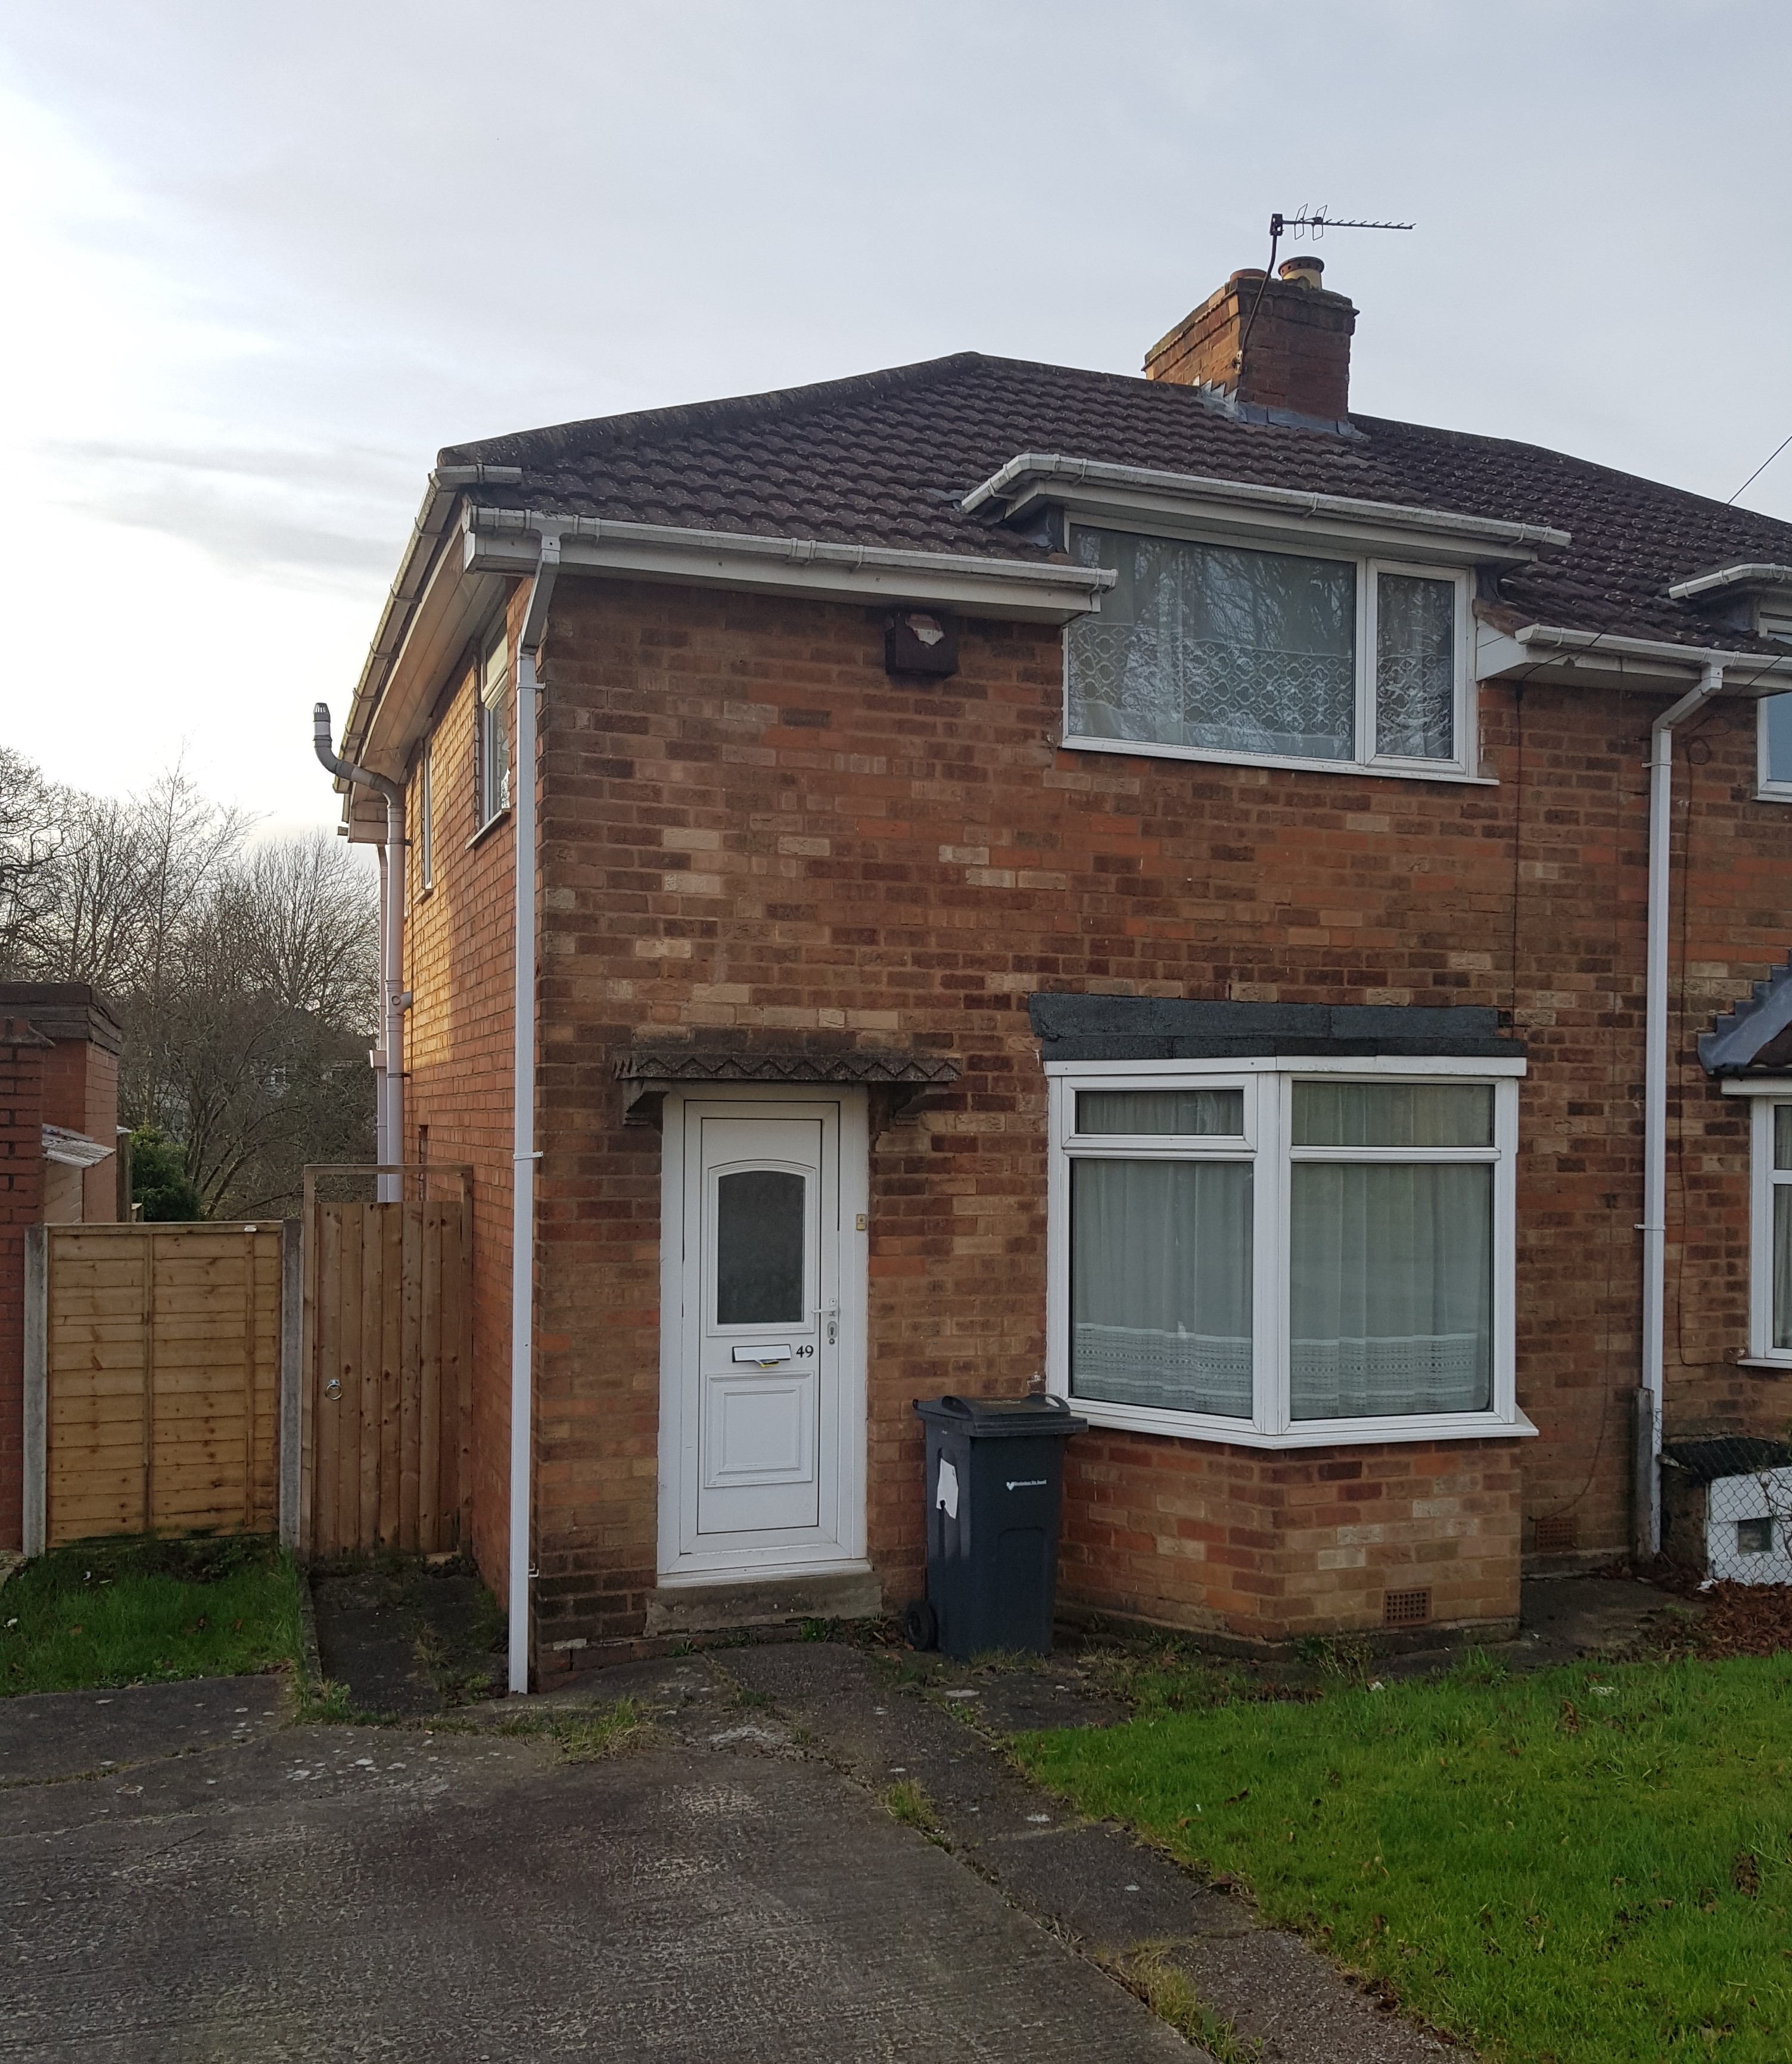 49 Cotford Road, Birmingham B14 5JJ. A freehold semi detached three bedroom house. A front garden